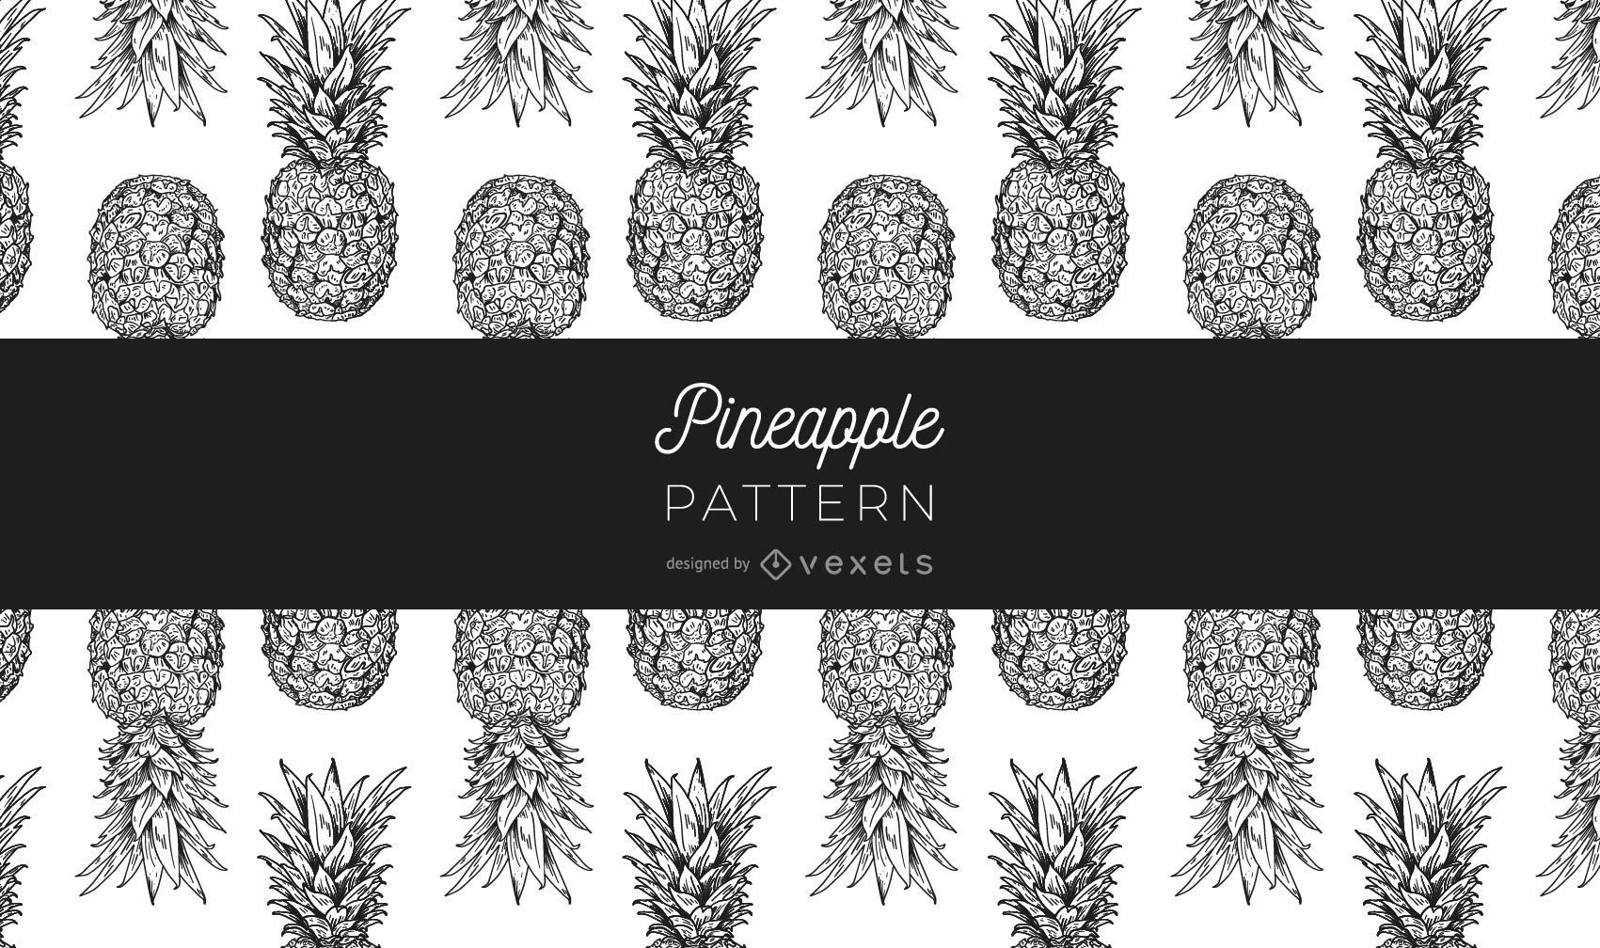 Black and white pineapple pattern